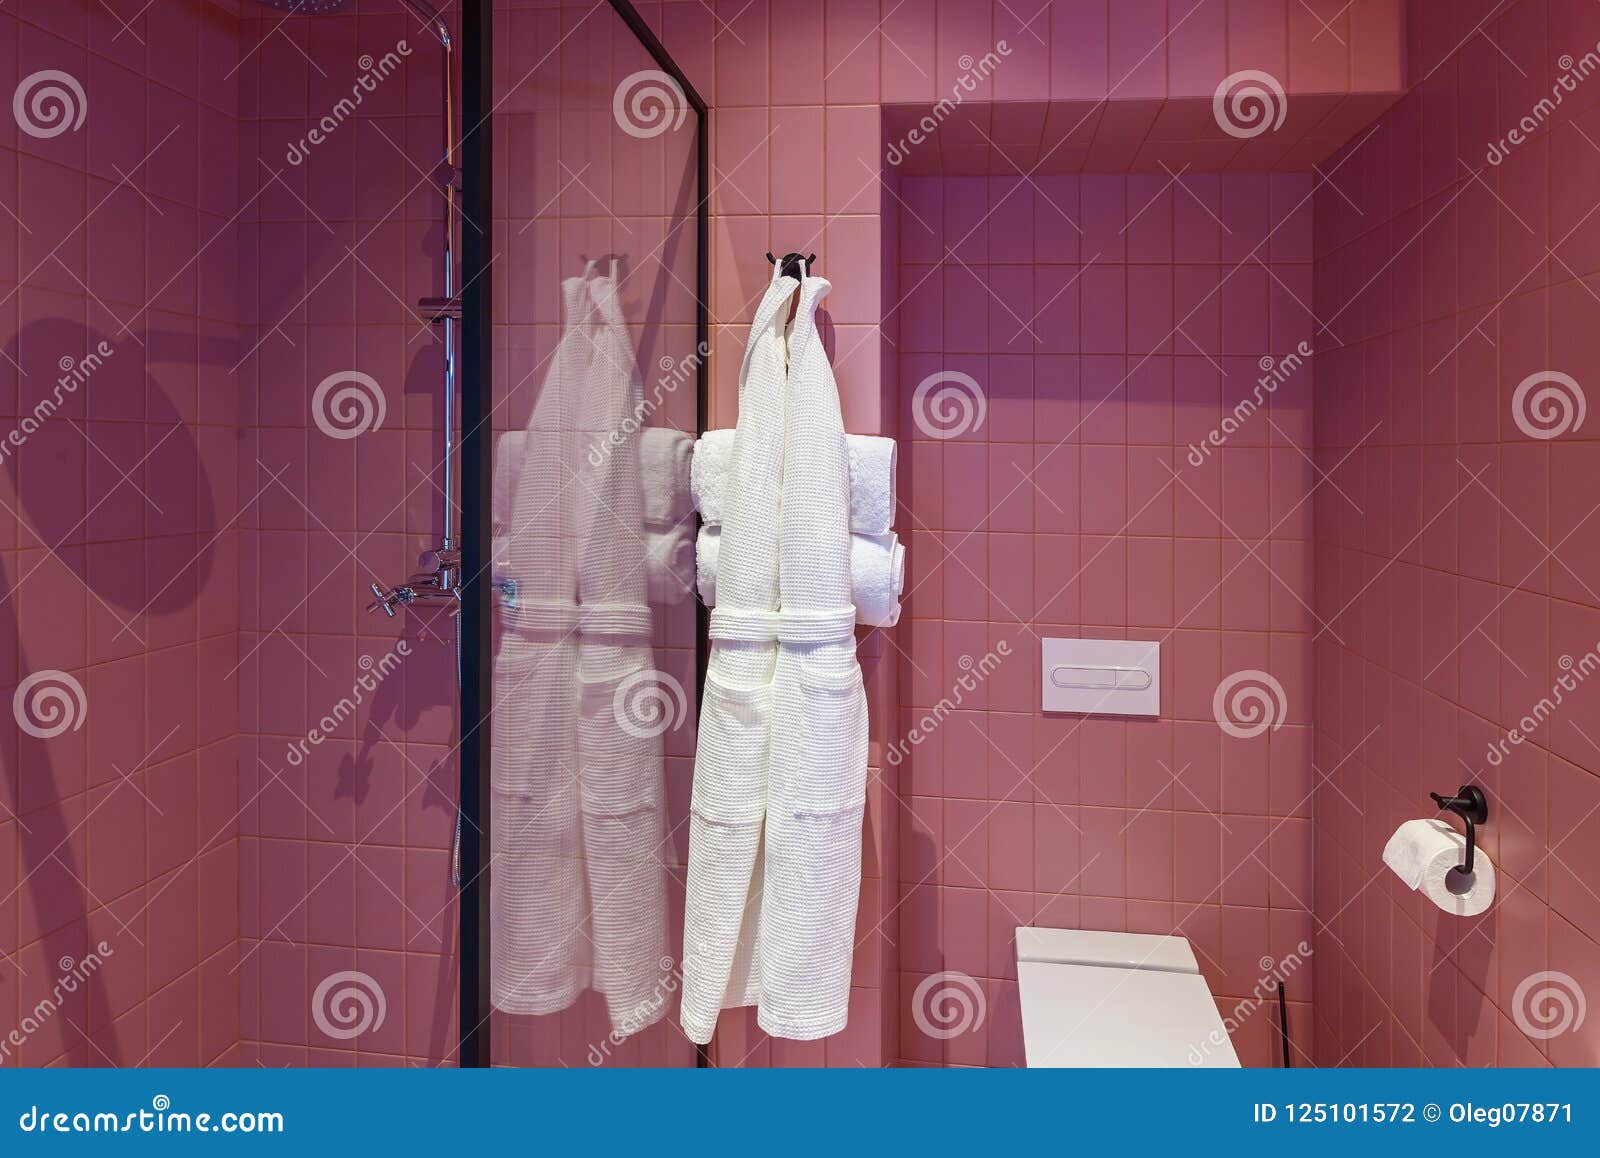 Interior And Objects In The Bathroom Stock Photo Image Of